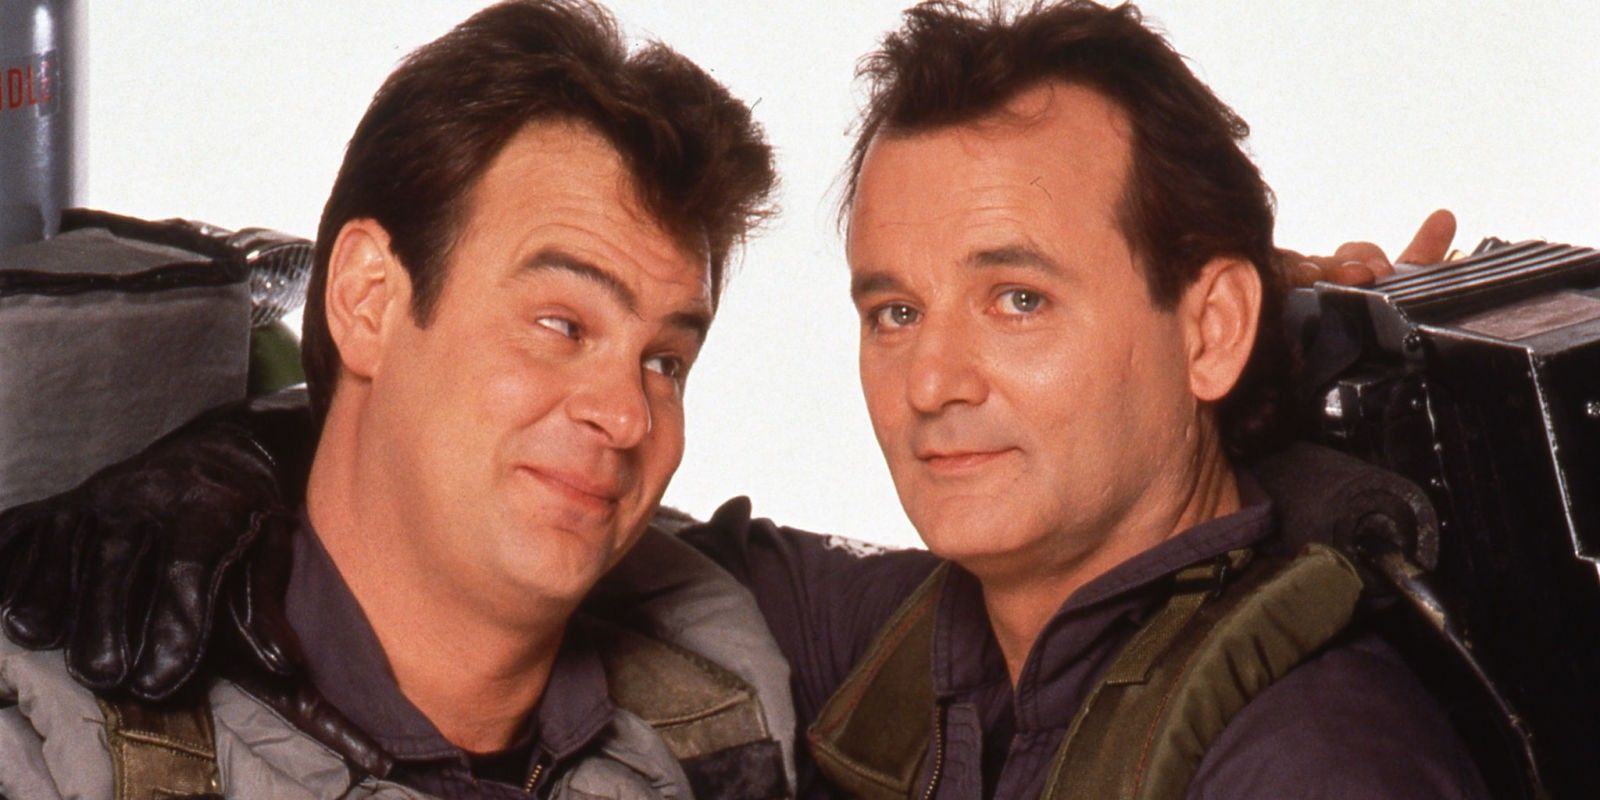 Ghostbusters 2 Was Not The Story They Wrote Says Bill Murray